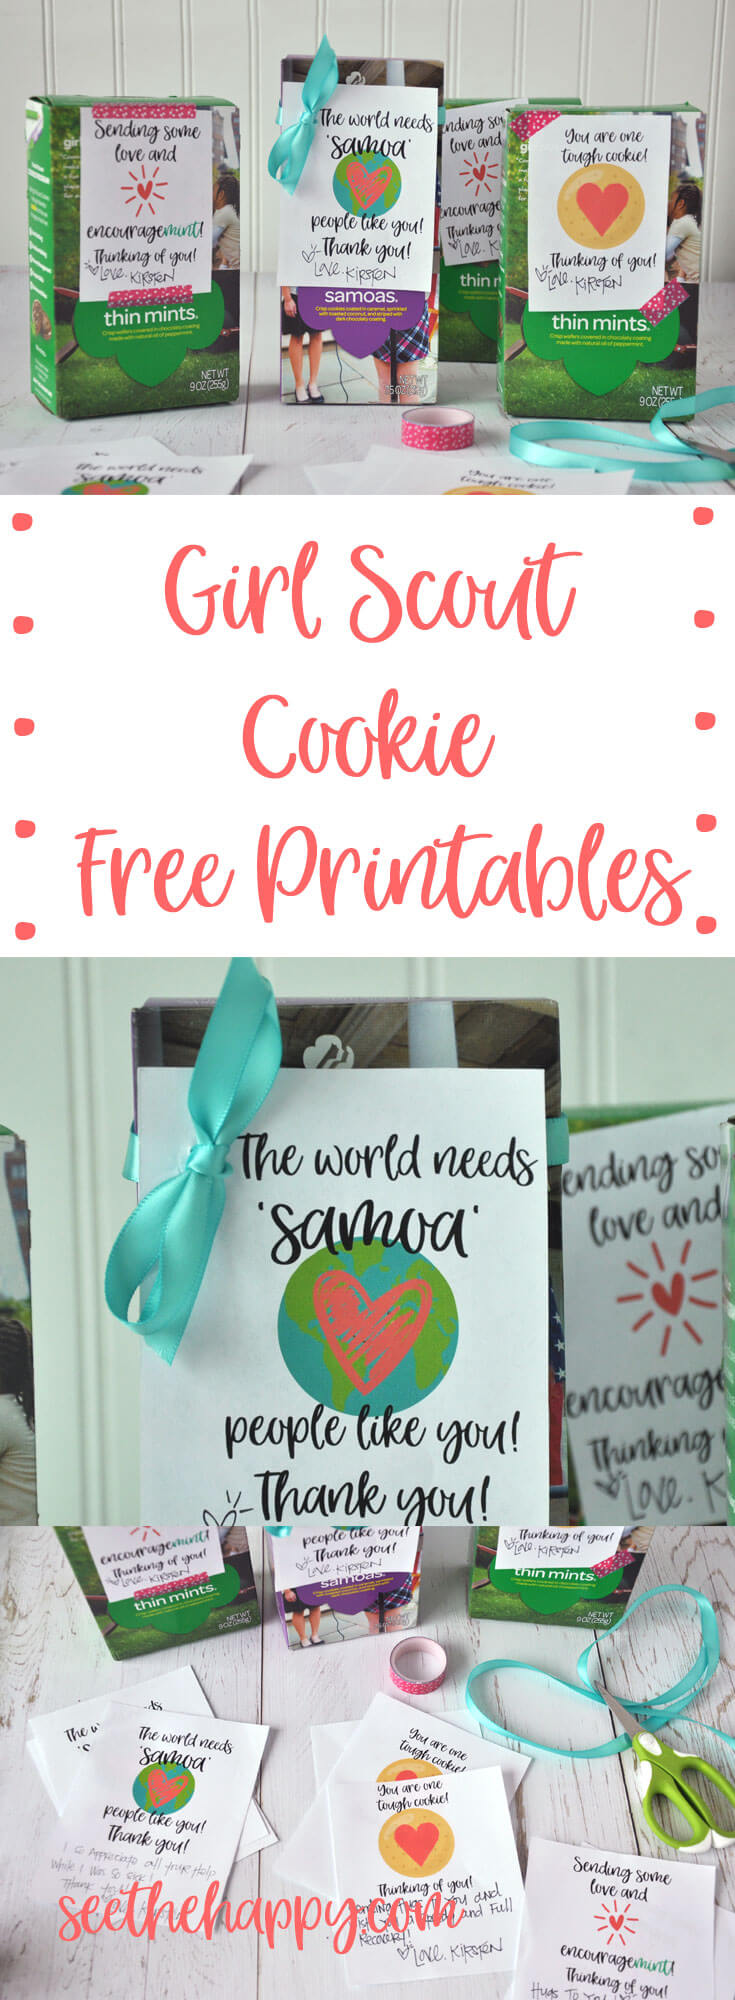 girl-scout-cookie-free-printables-a-fun-way-to-brighten-someone-s-day